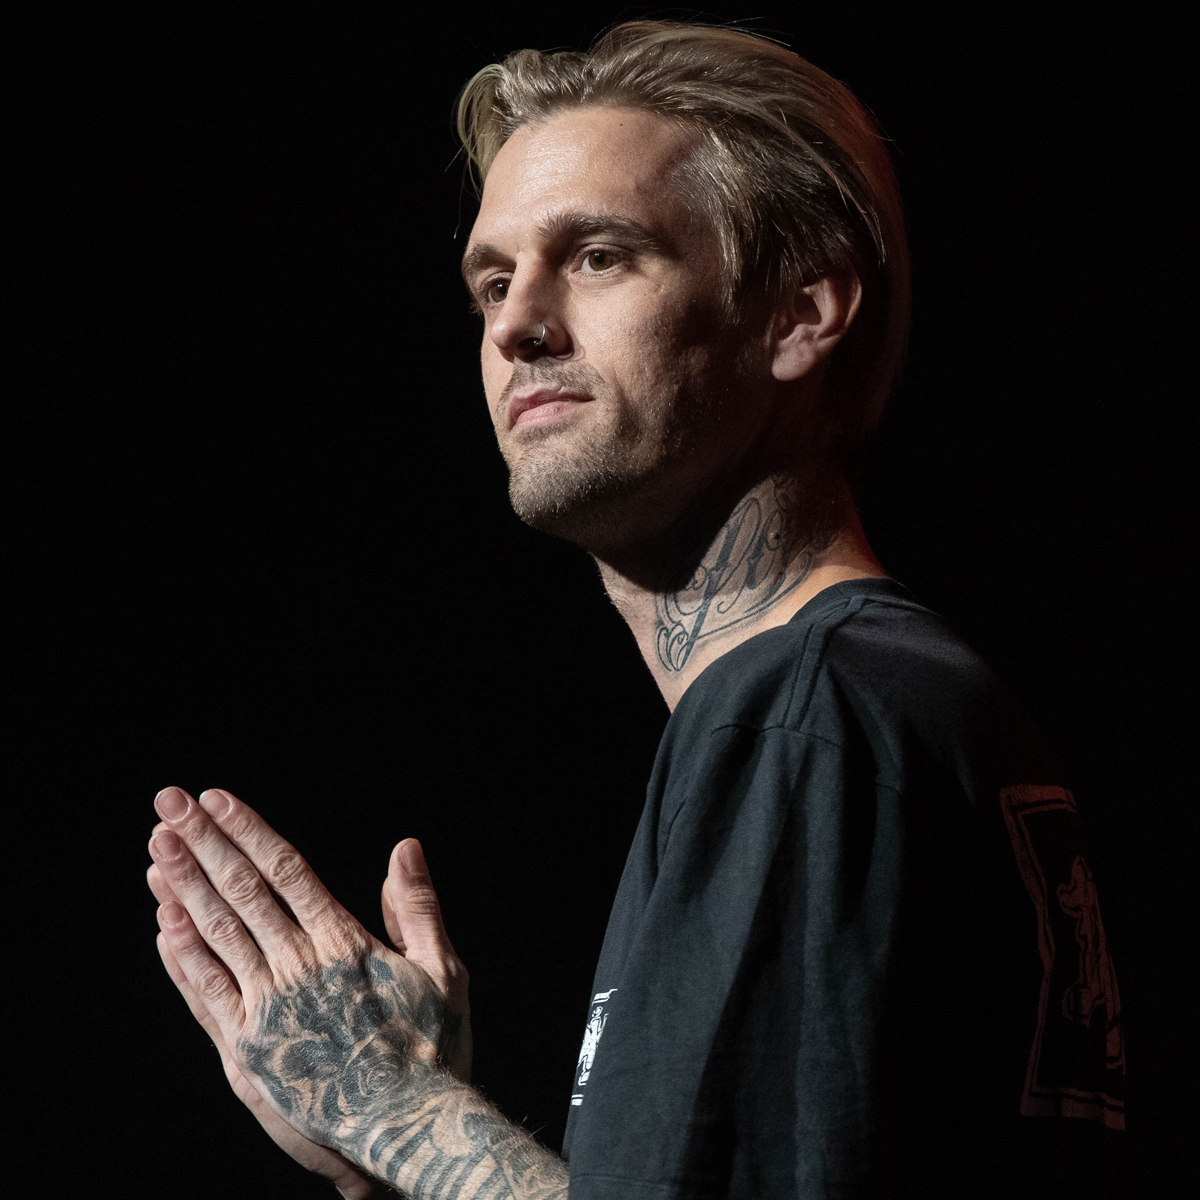 Inside Aaron Carter’s Rocky Journey After Child Star Success